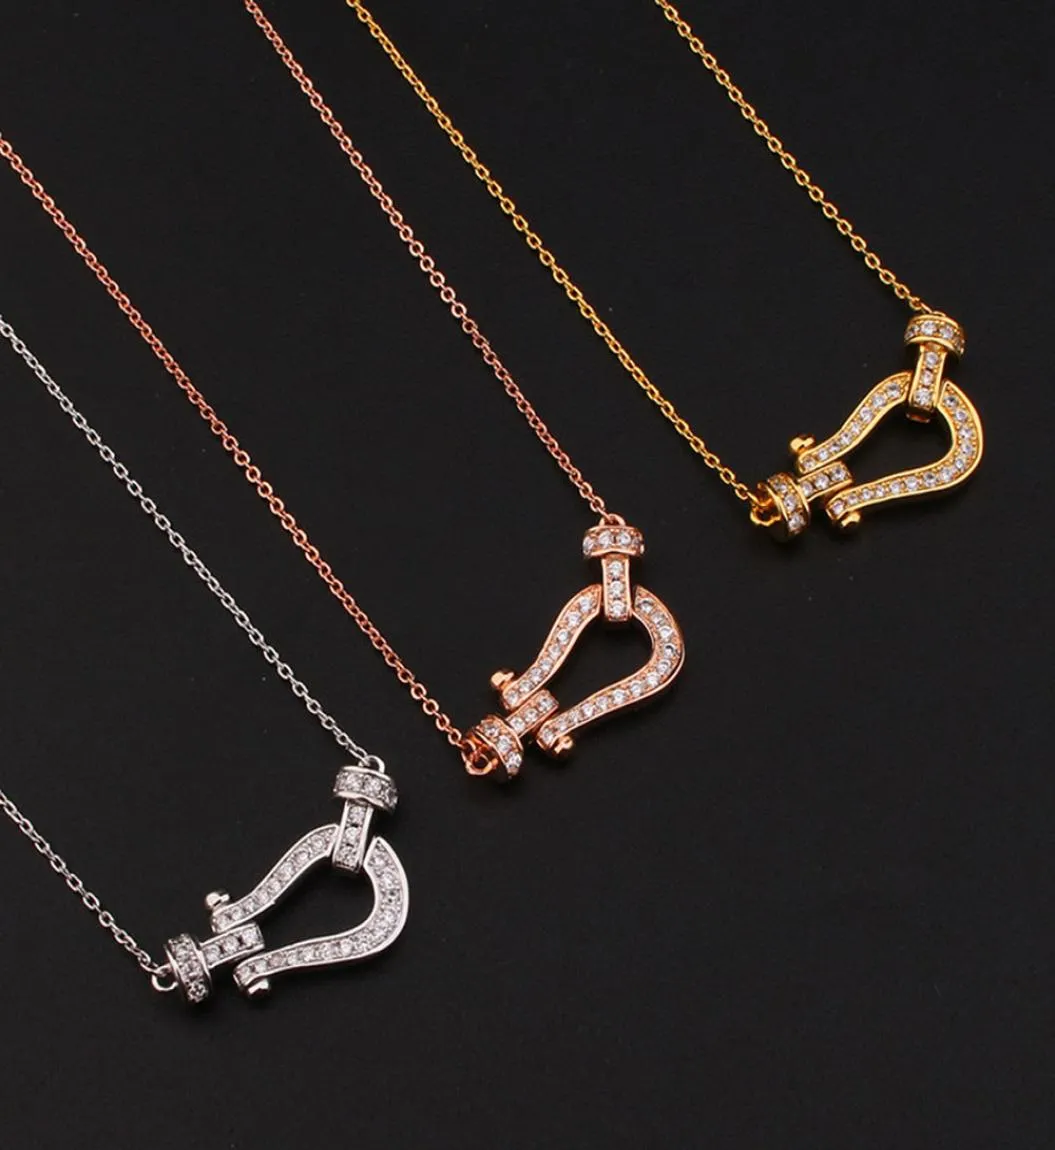 Fashion Horseshoe Buckle Necklace Full Of Zircon Inlaid Iced Out Pendant Clavicle Chain Popular Women039s Jewelry Whole Hip3891142